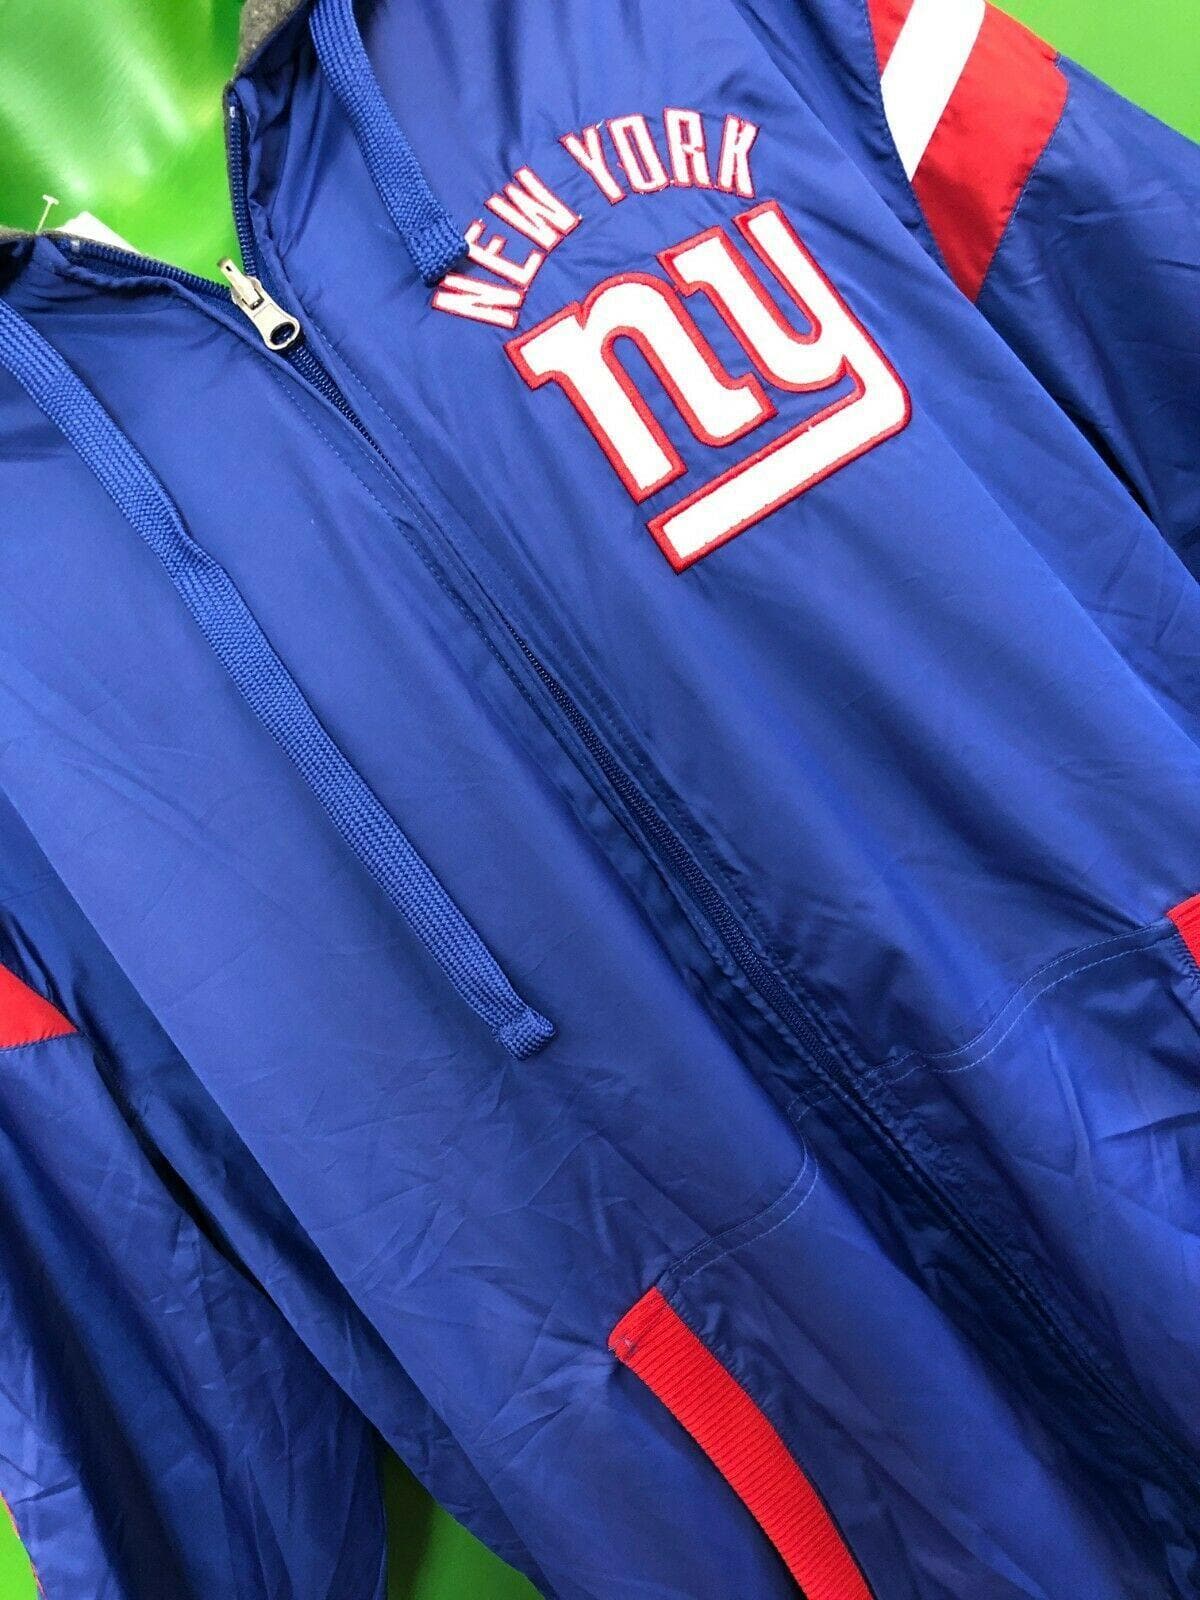 NFL New York Giants GIII by Carl Banks Reversible Jacket Men's 2X-Large NWT